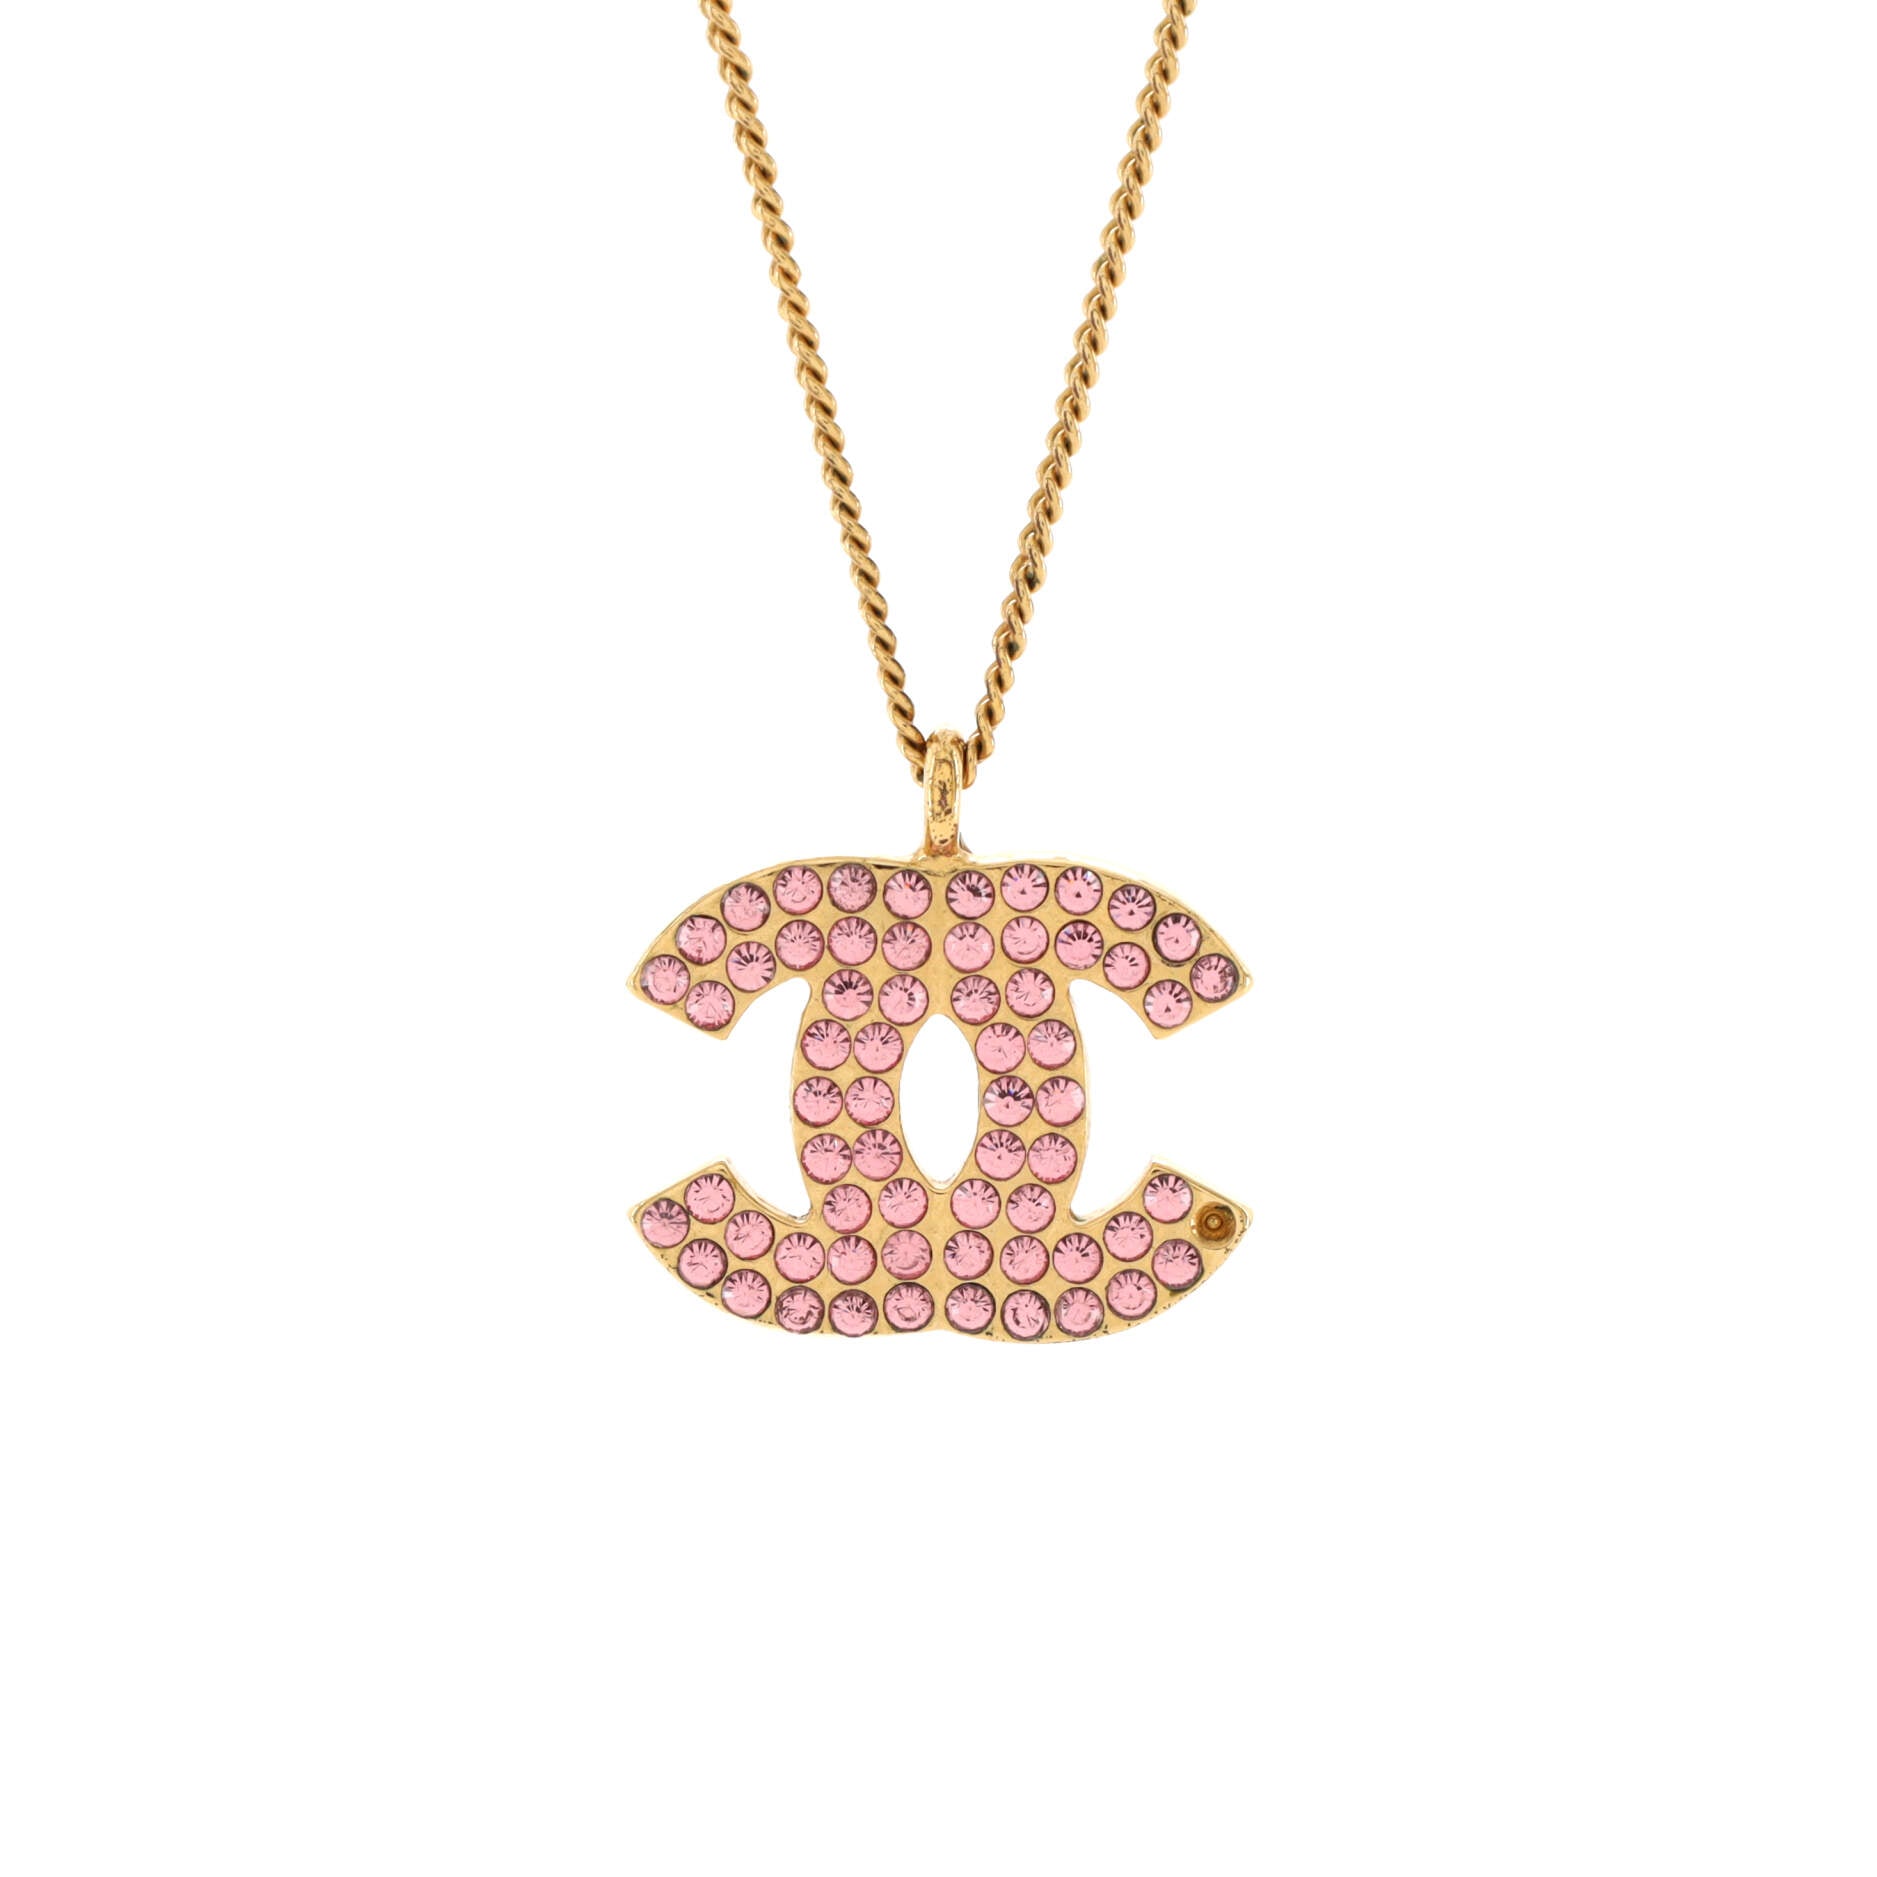 Chanel Pre-owned 1995 CC Pendant Double-Chain Necklace - Gold